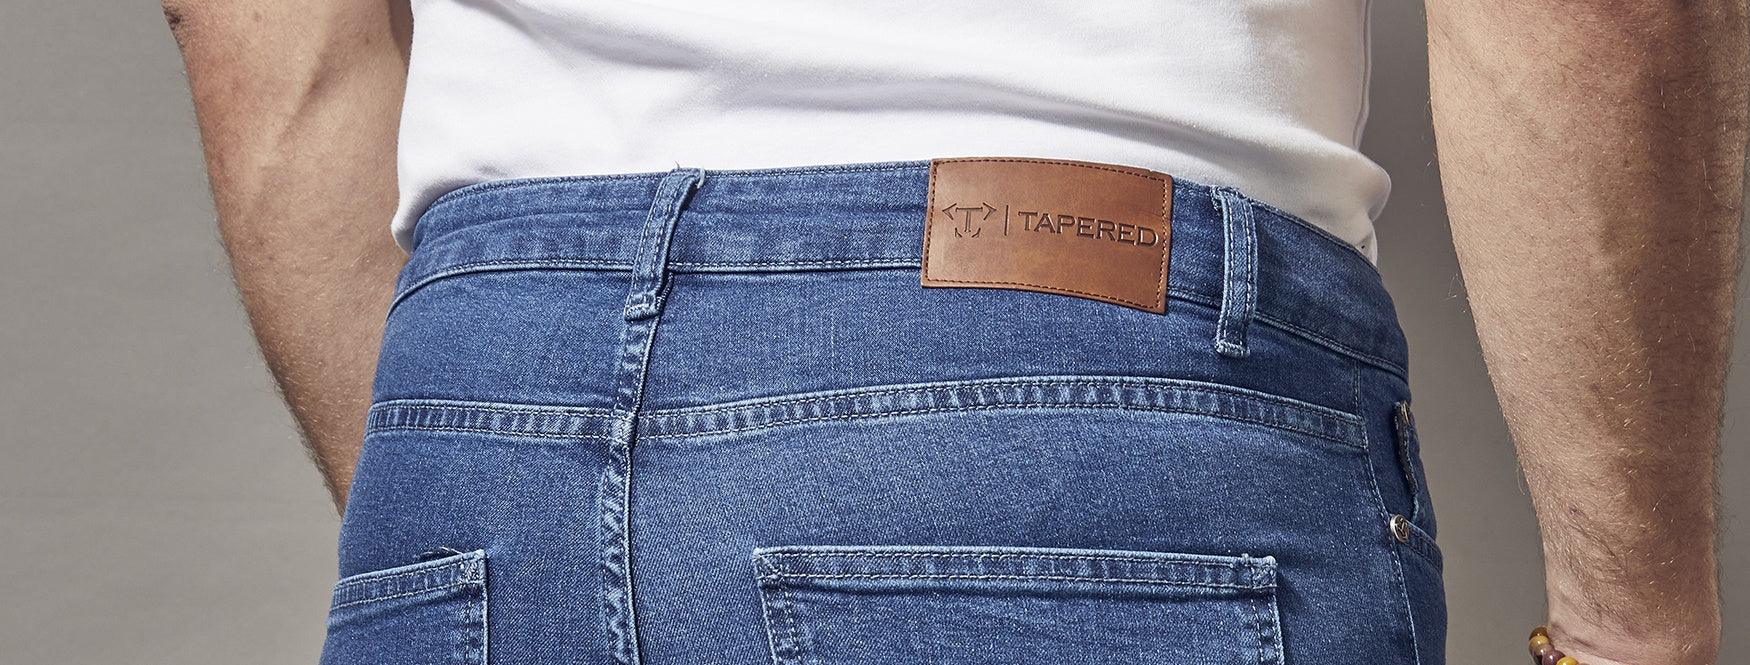 Slim Fit Jeans Alternative by Tapered Menswear